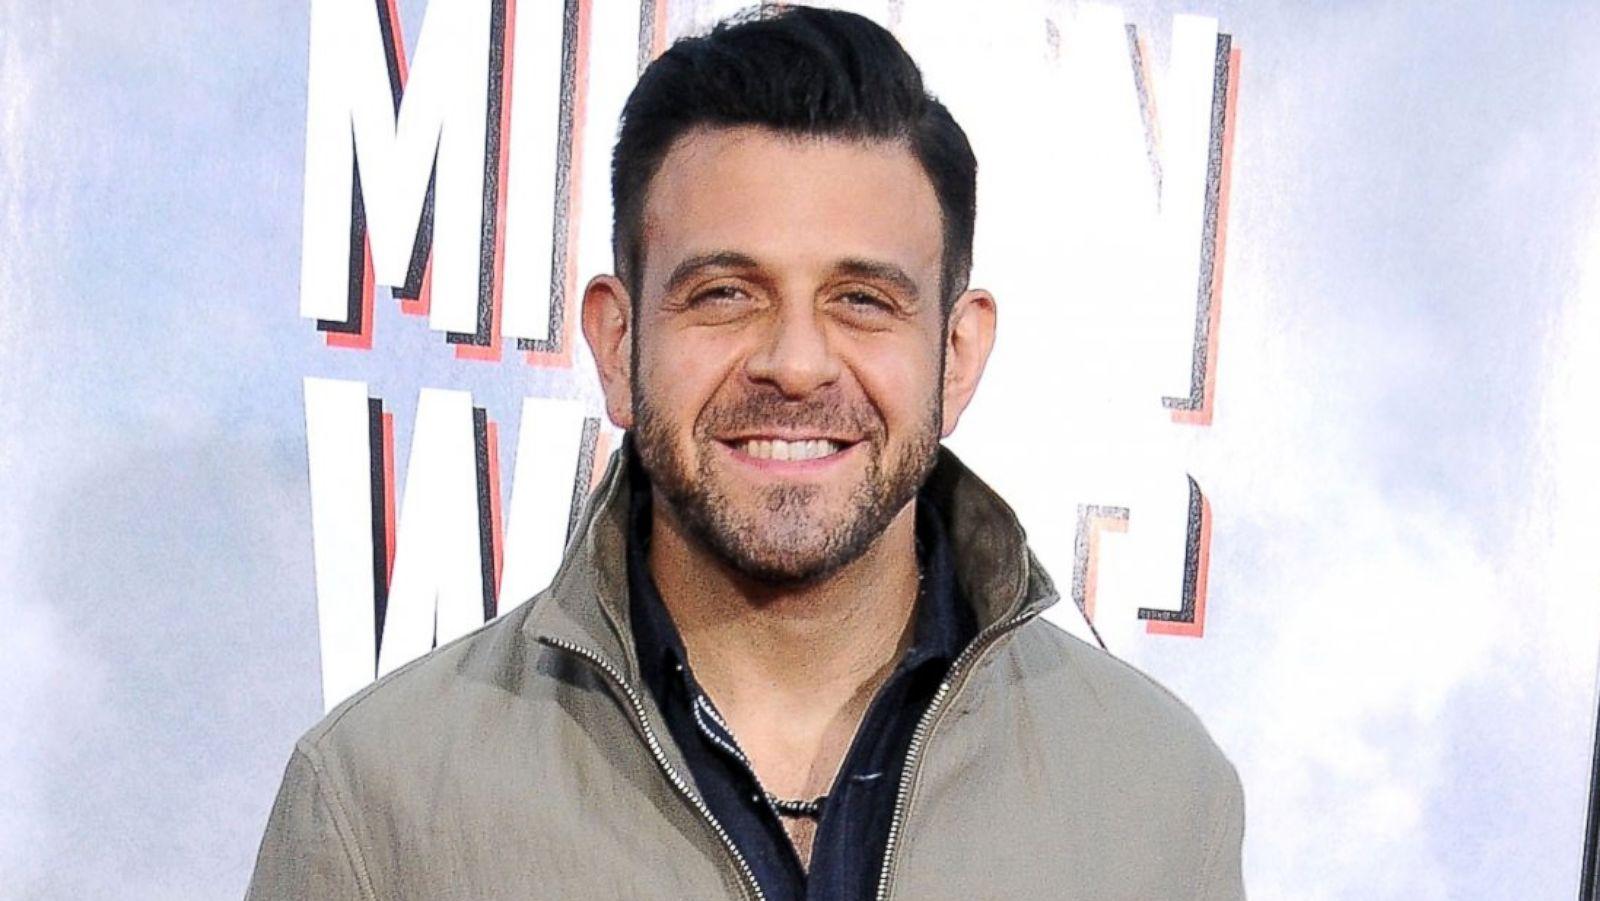 Adam Richman Apologizes for 'Inexcusable Remarks' on Twitter